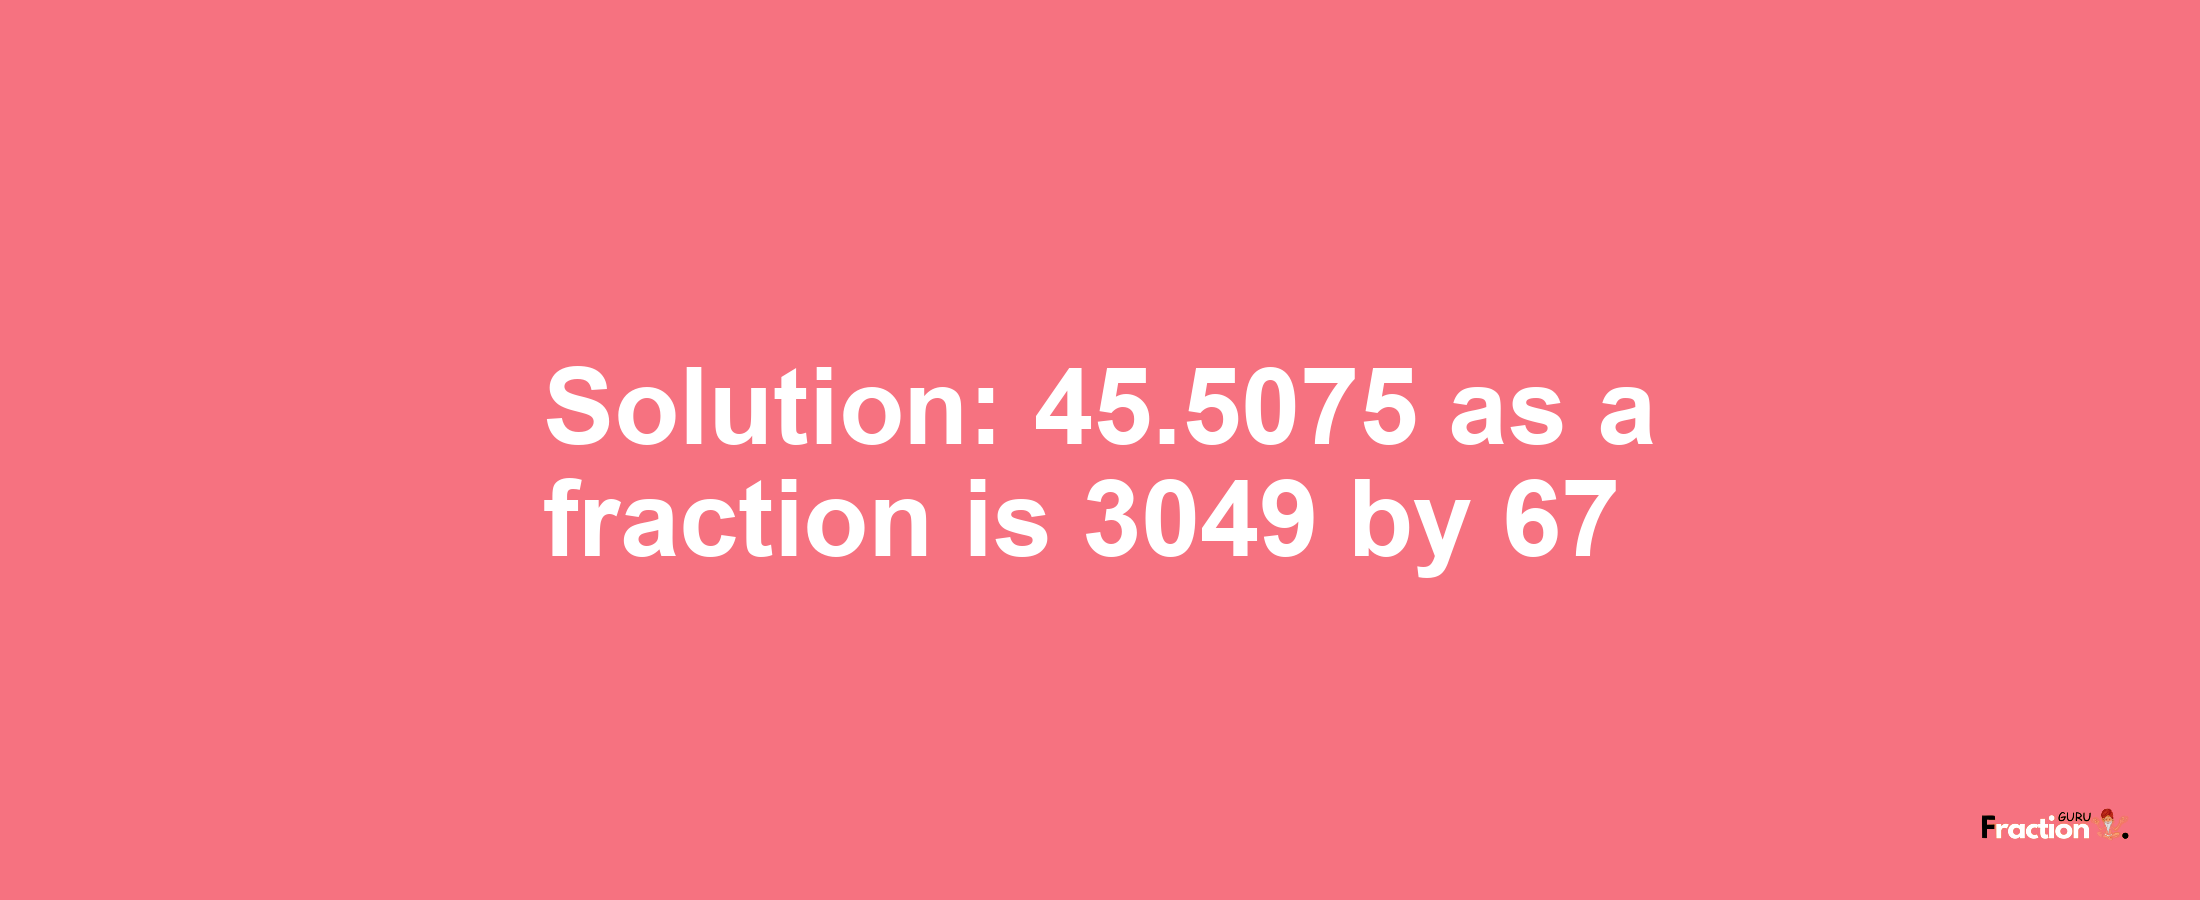 Solution:45.5075 as a fraction is 3049/67